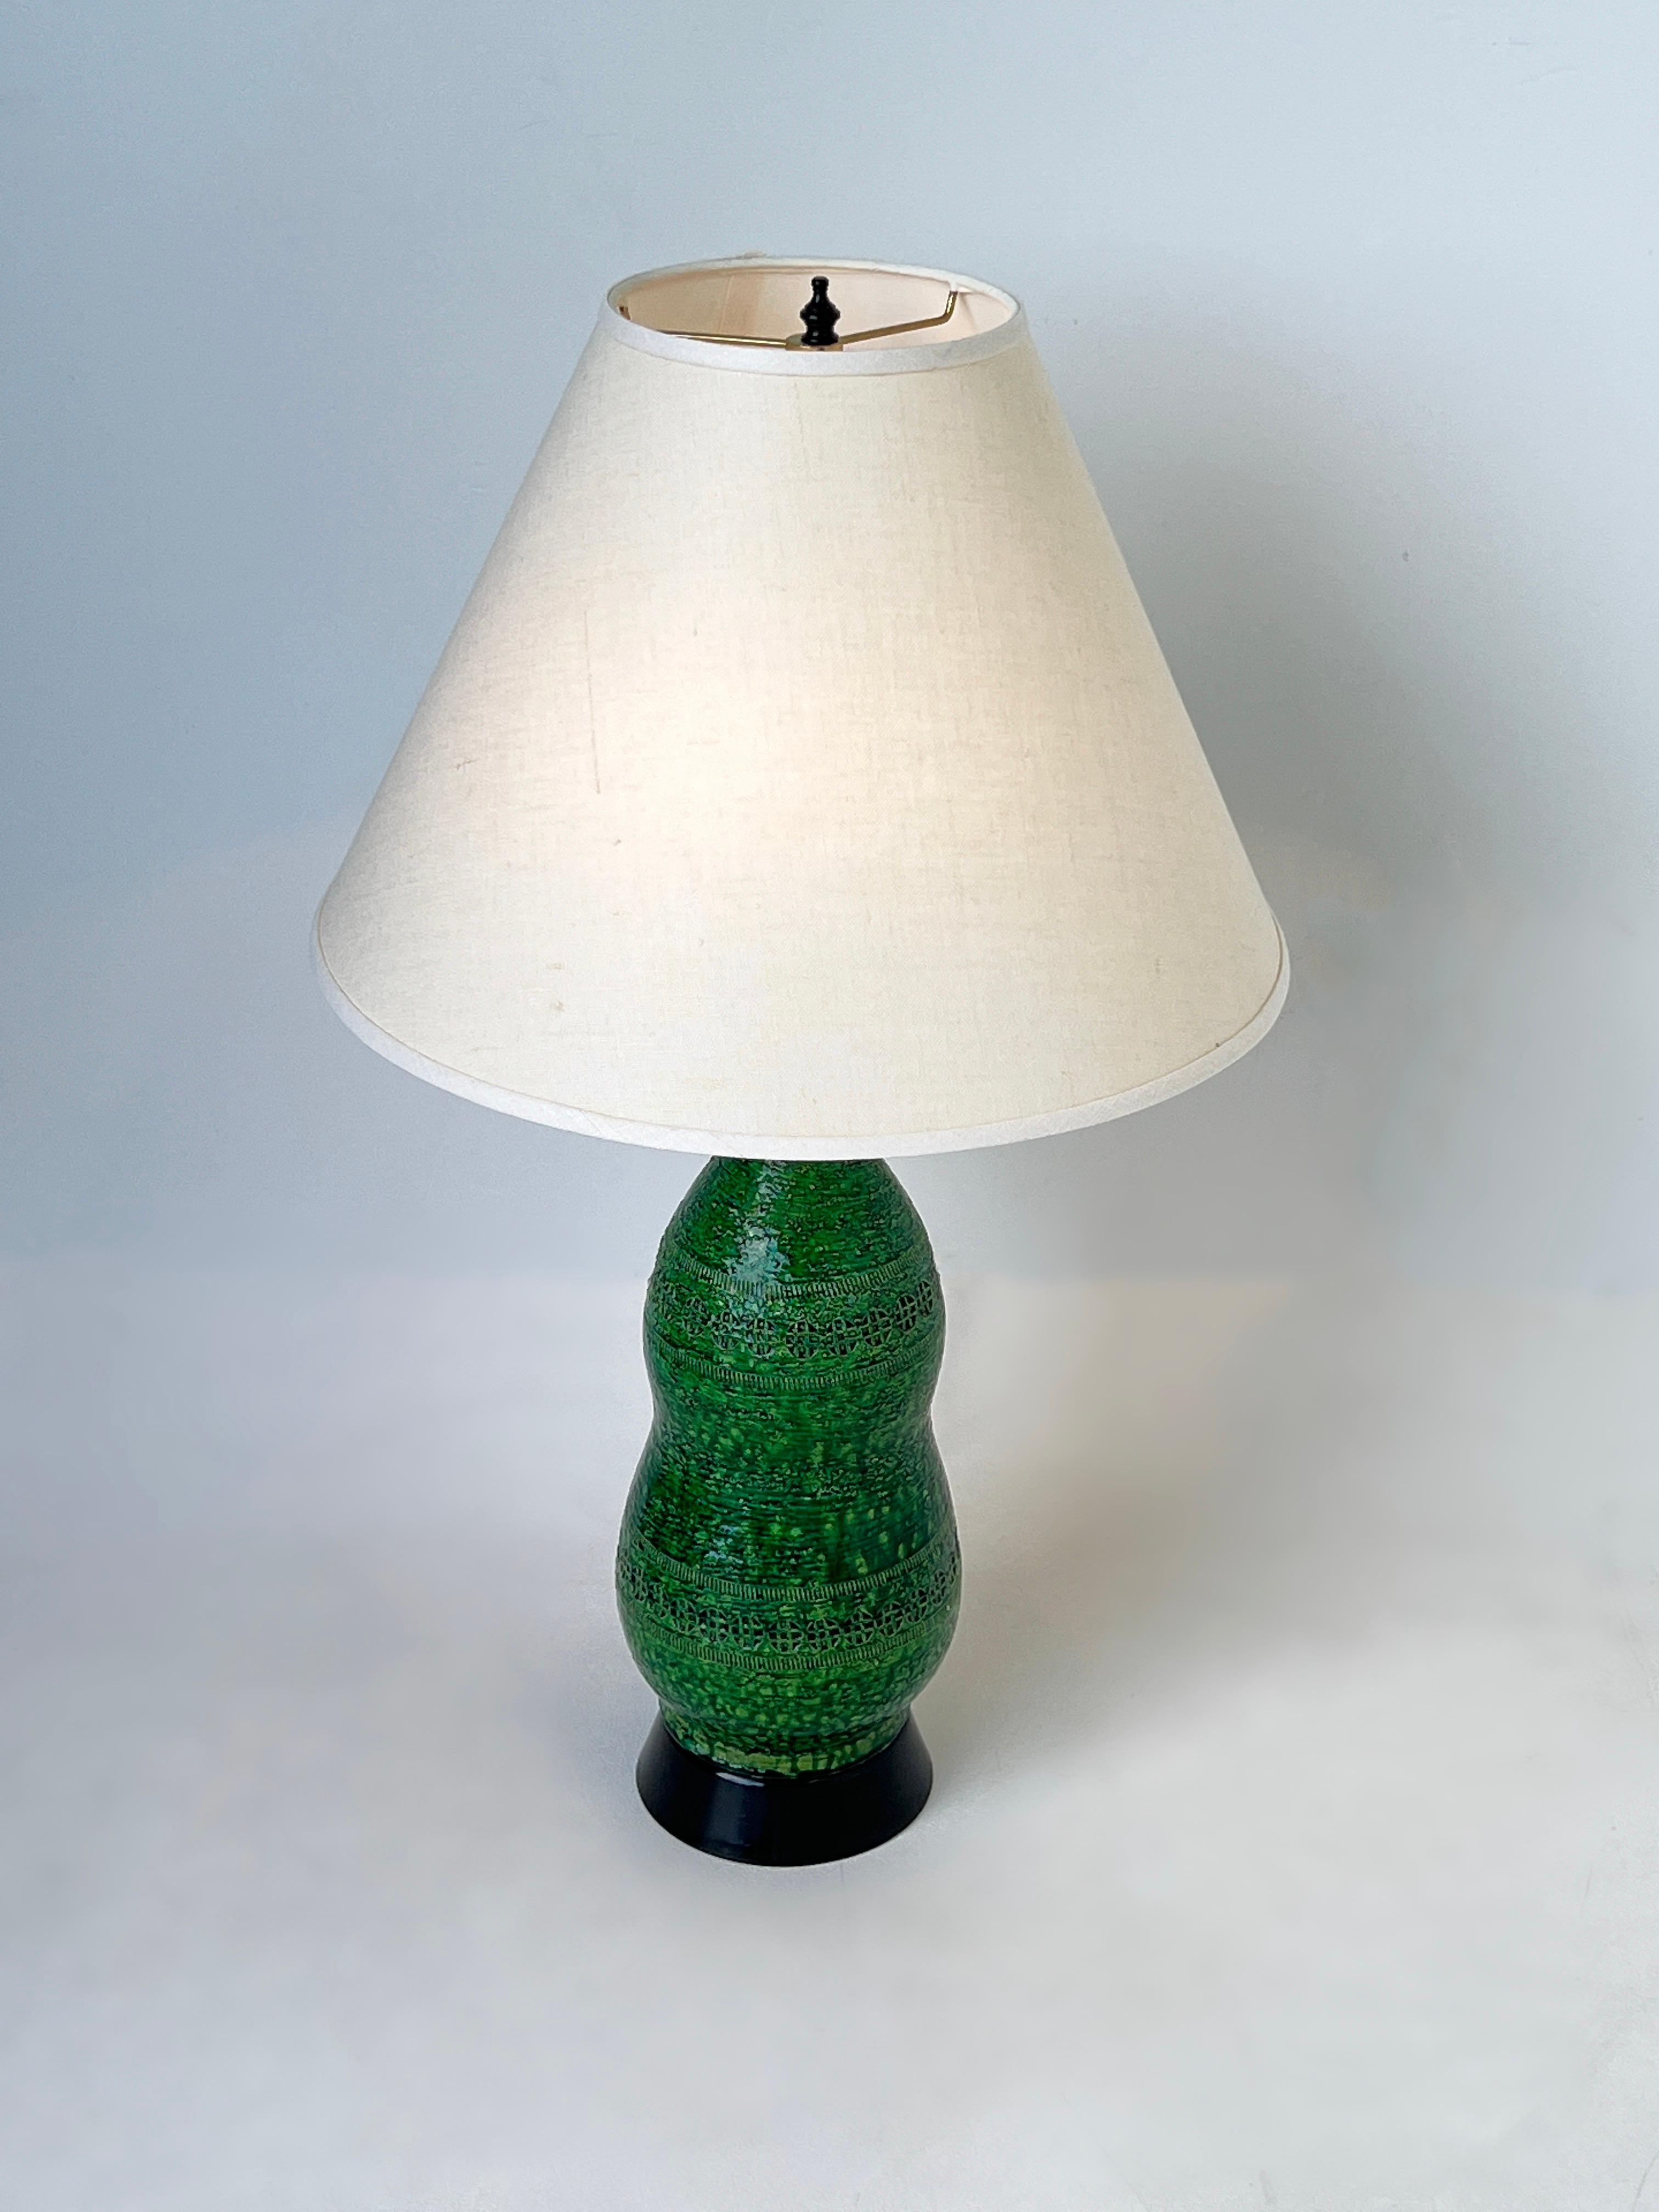 Glazed Italian Green Ceramic and Black Lacquered Table Lamp by Bitossi 